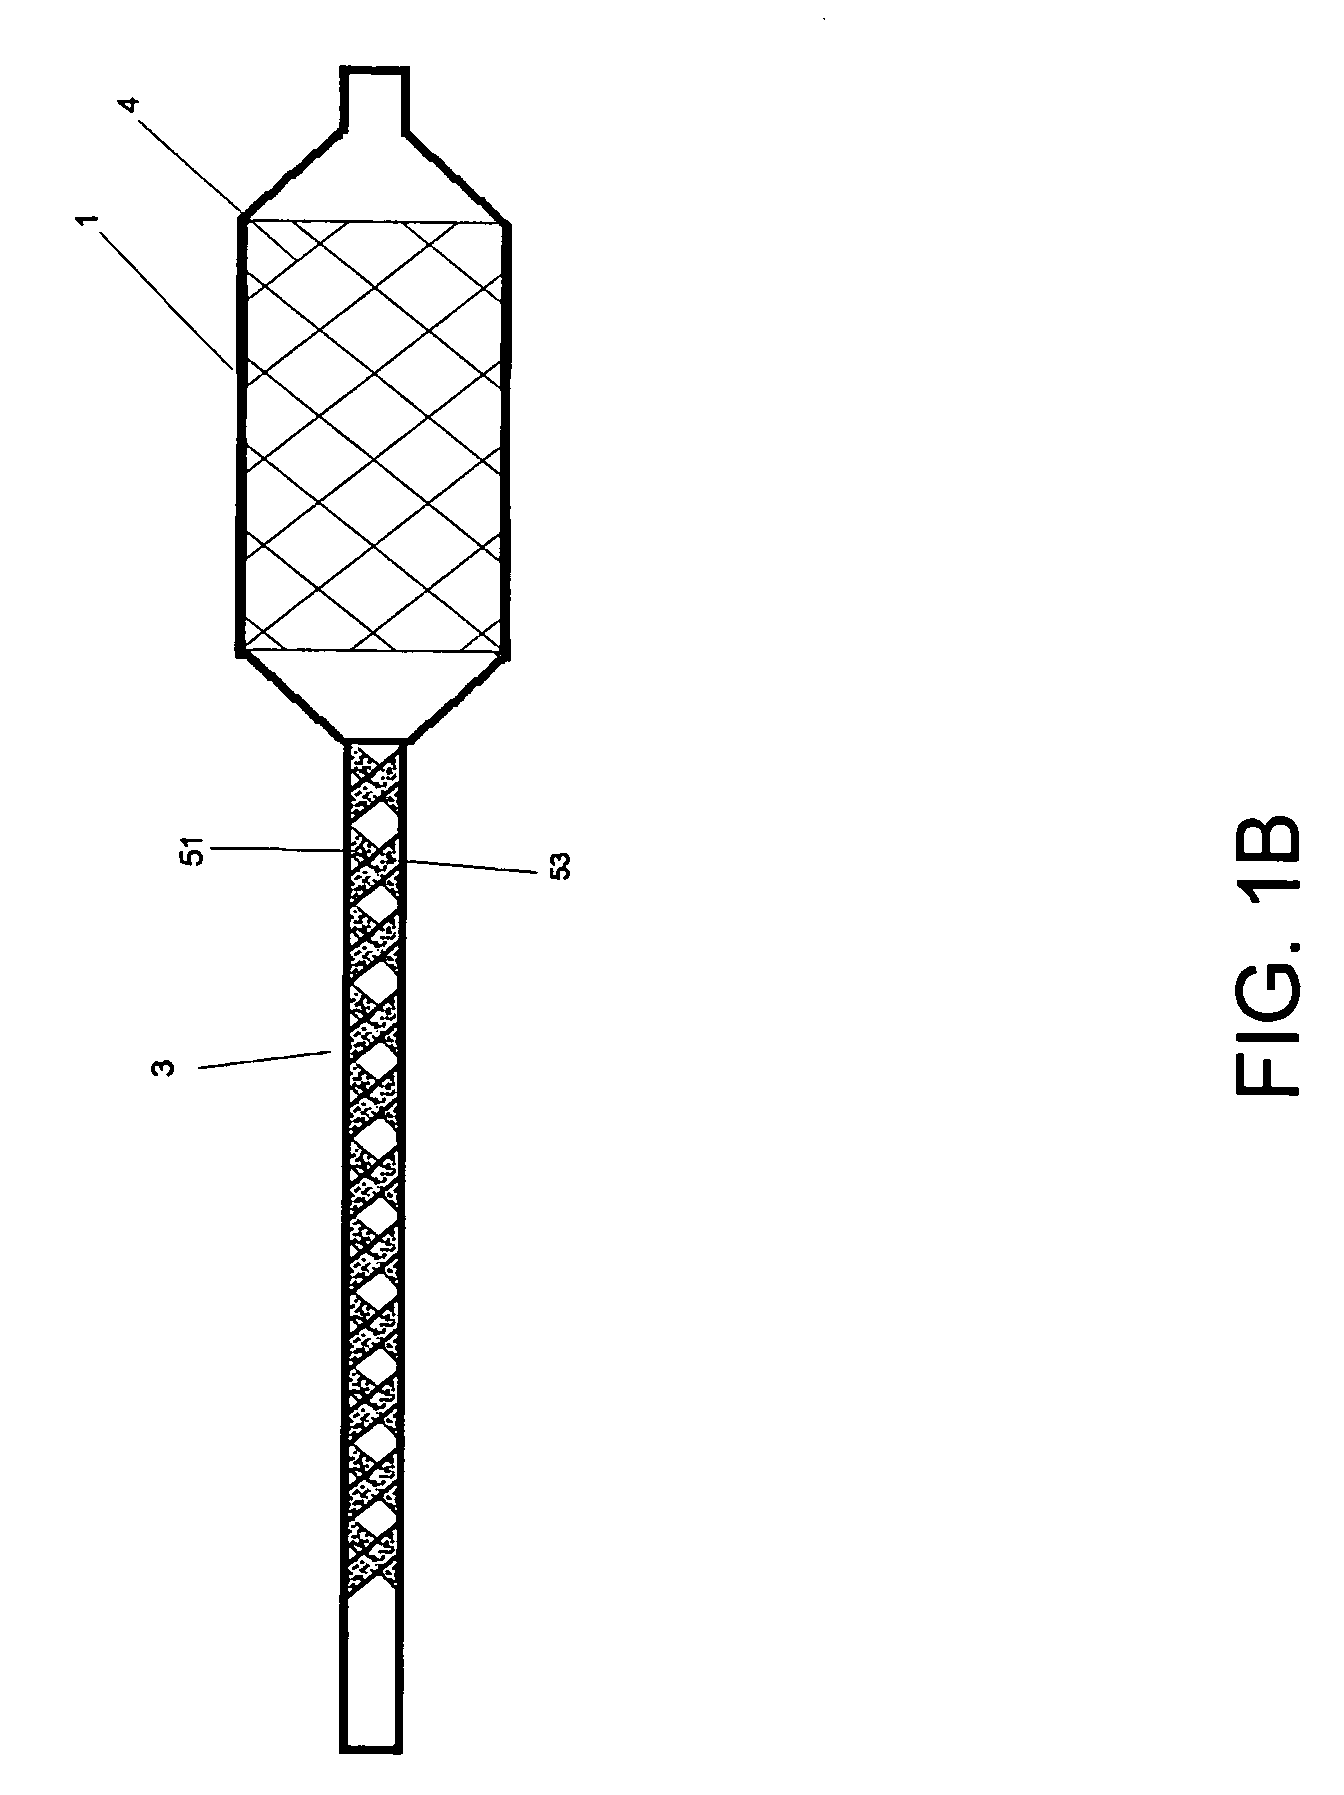 Adjustable bifurcation catheter incorporating electroactive polymer and methods of making and using the same